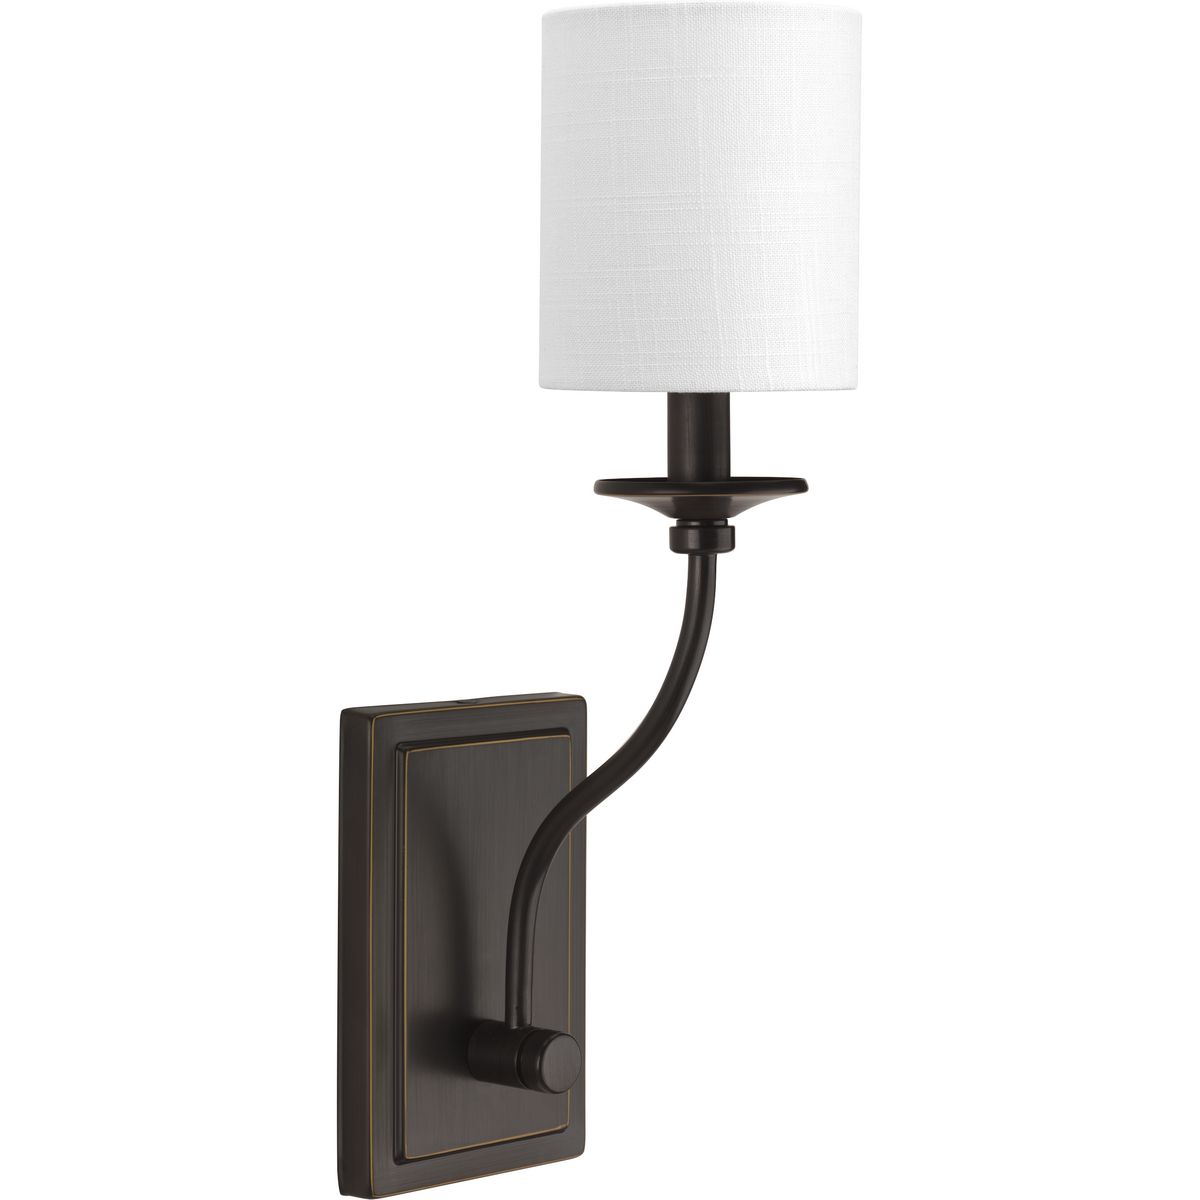 P710018-020 1-60W CAND WALL SCONCE